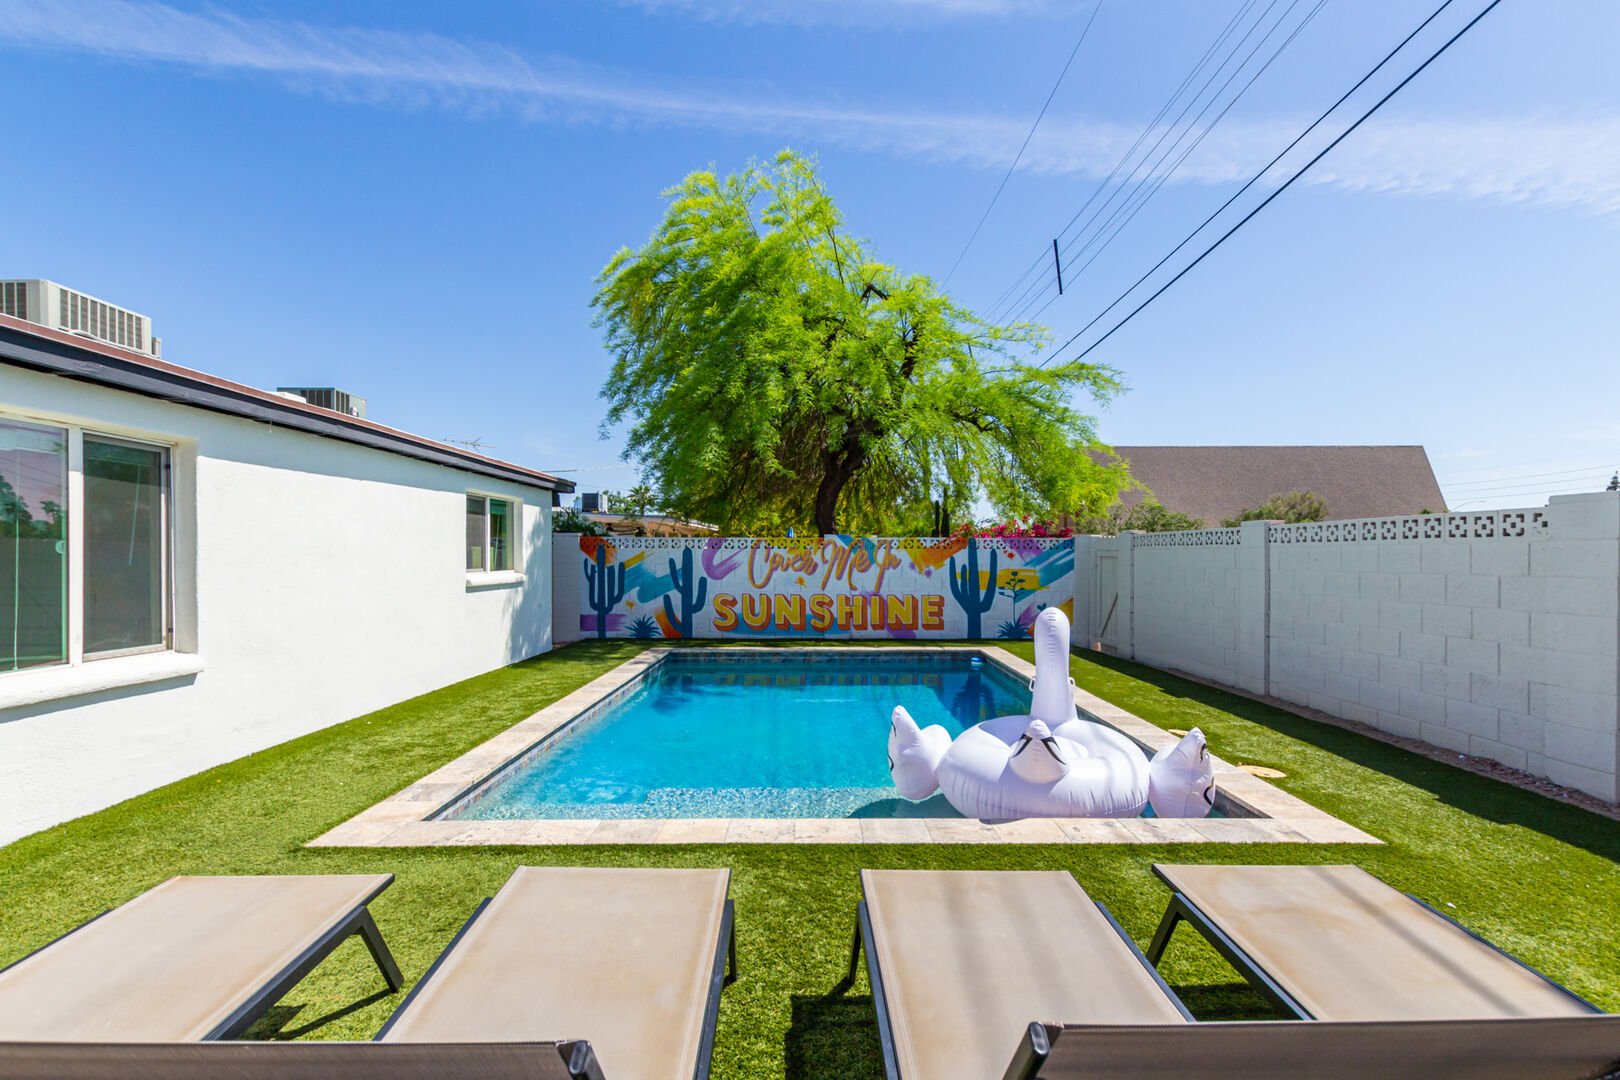 Private Backyard featuring a new mural, sparkling blue pool, fire pit, yard games and a covered patio with outdoor dining and lounging.